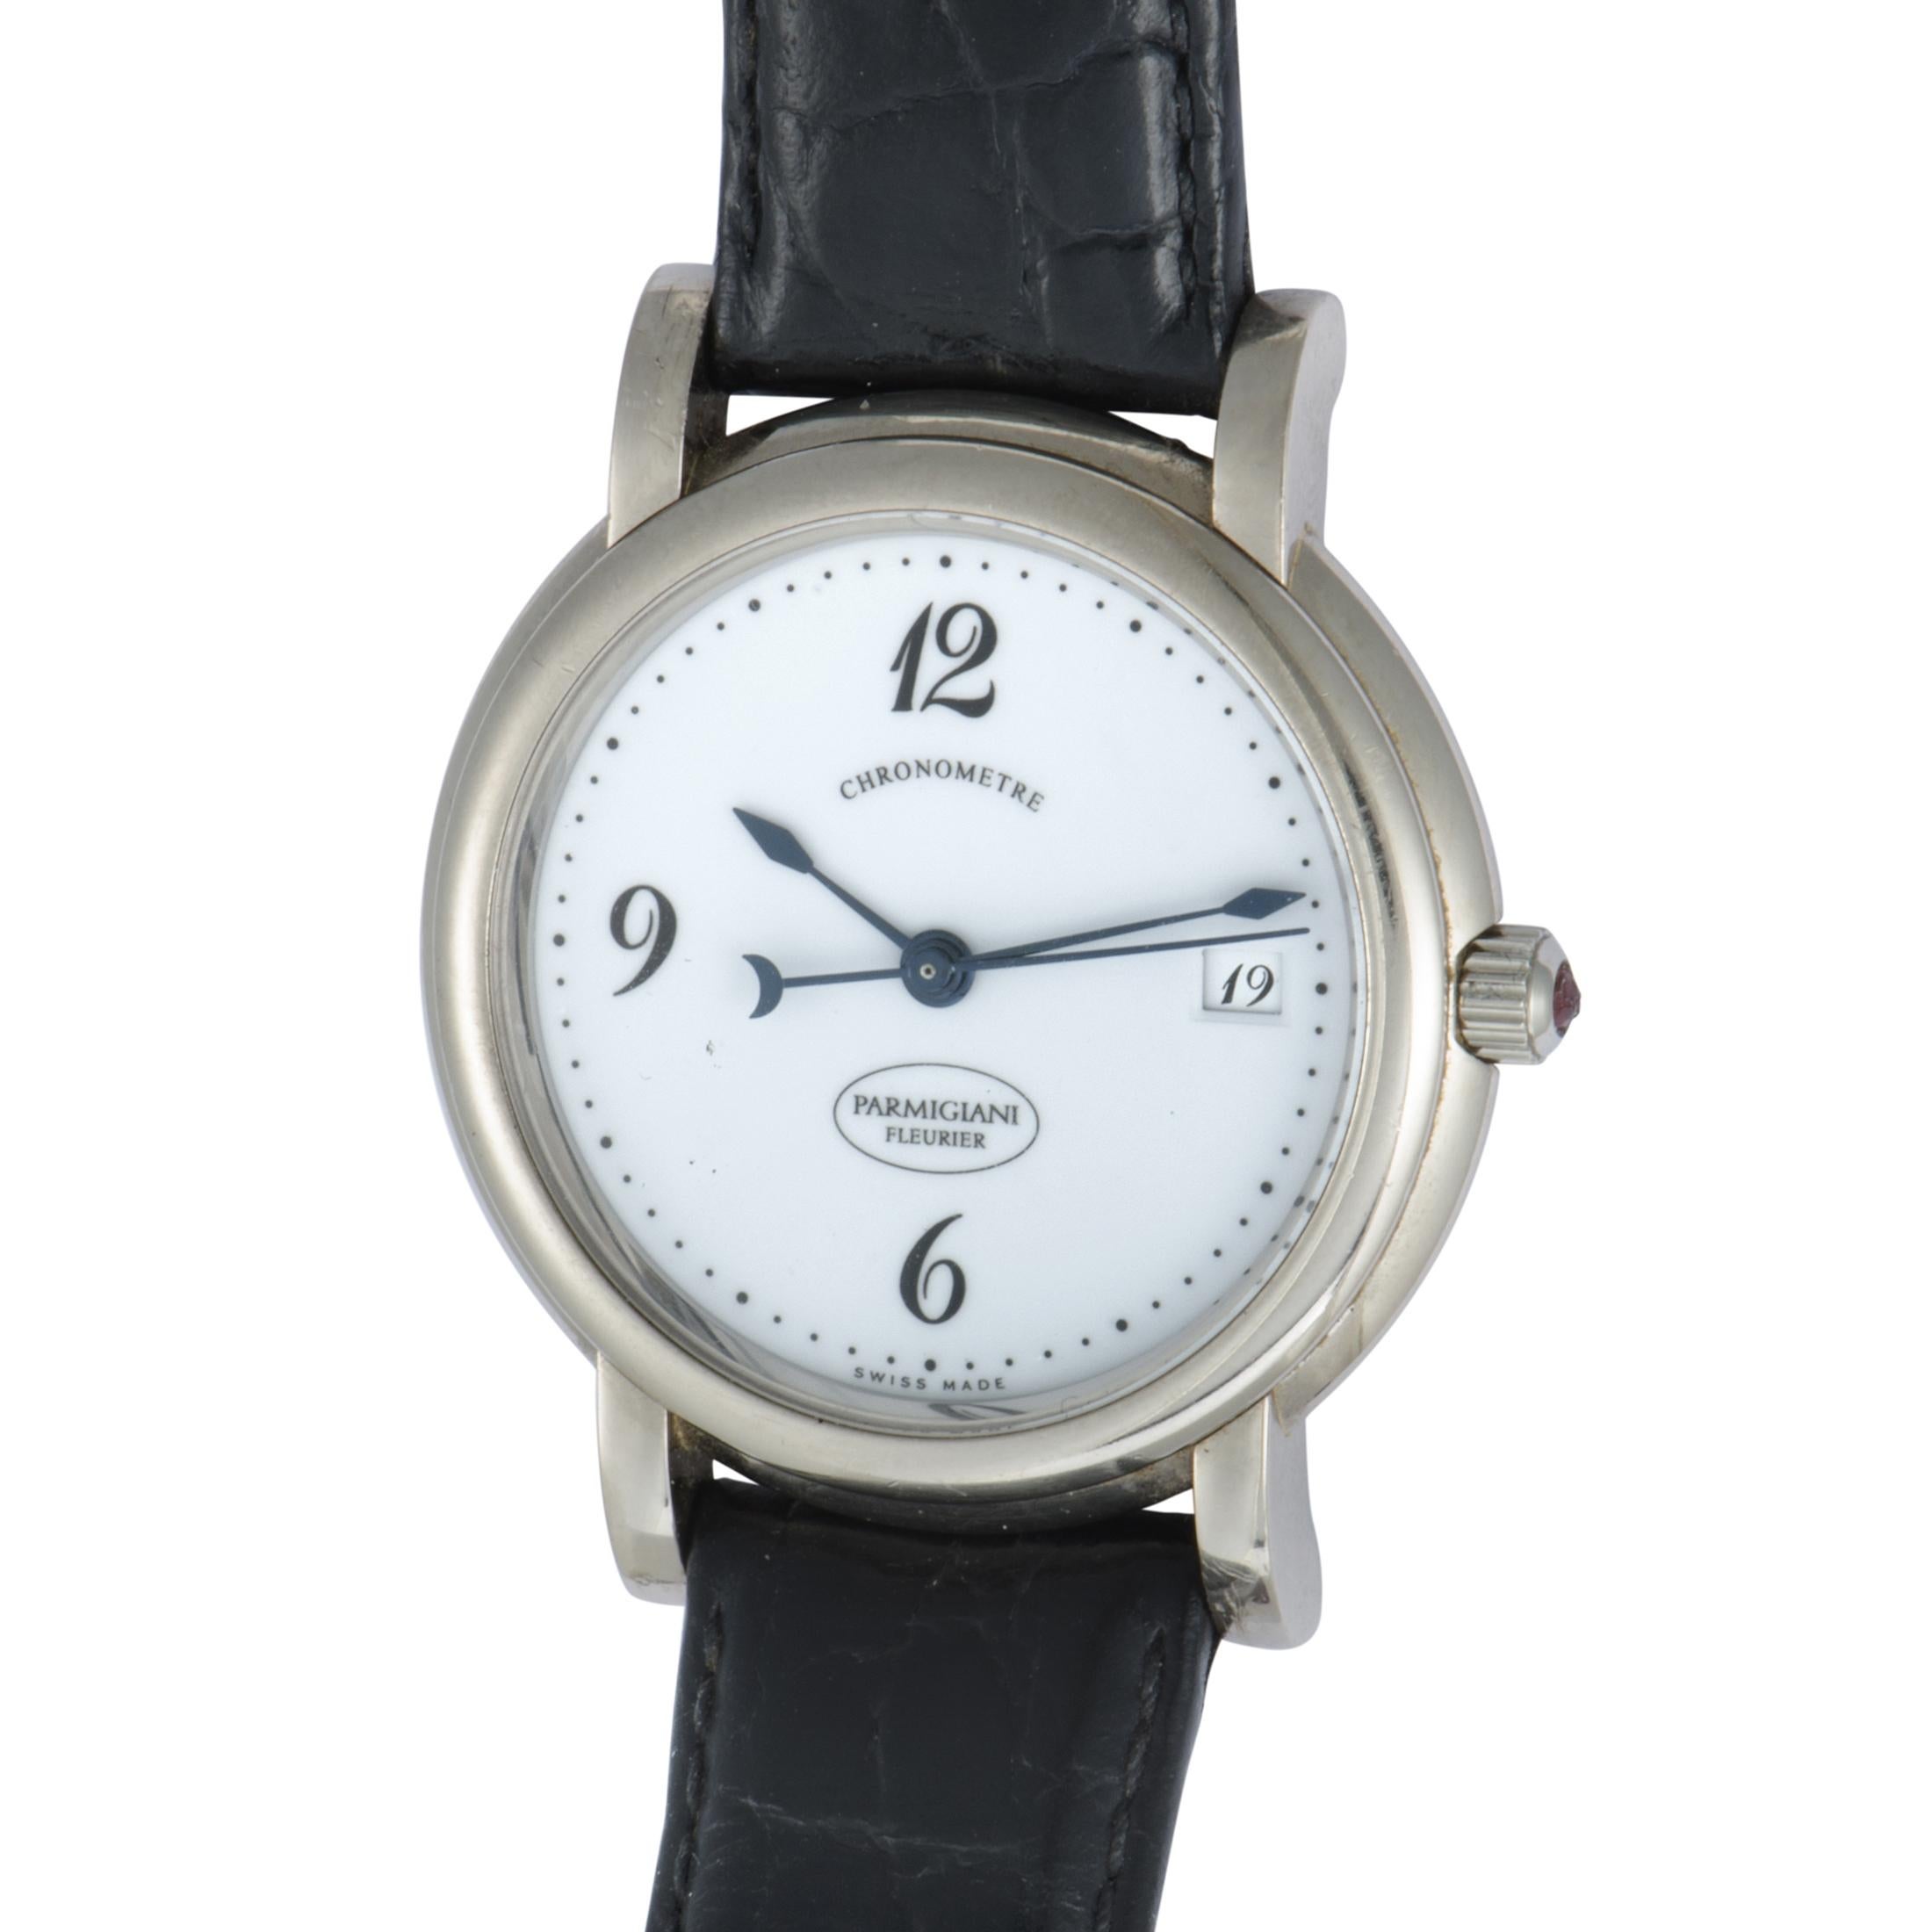 Absolutely refined, tastefully envisioned, and exquisitely executed, the eternally graceful and classically elegant design of this gorgeous timepiece from Parmigiani Fleurier offers a look of magnificent beauty and timeless style while also allowing